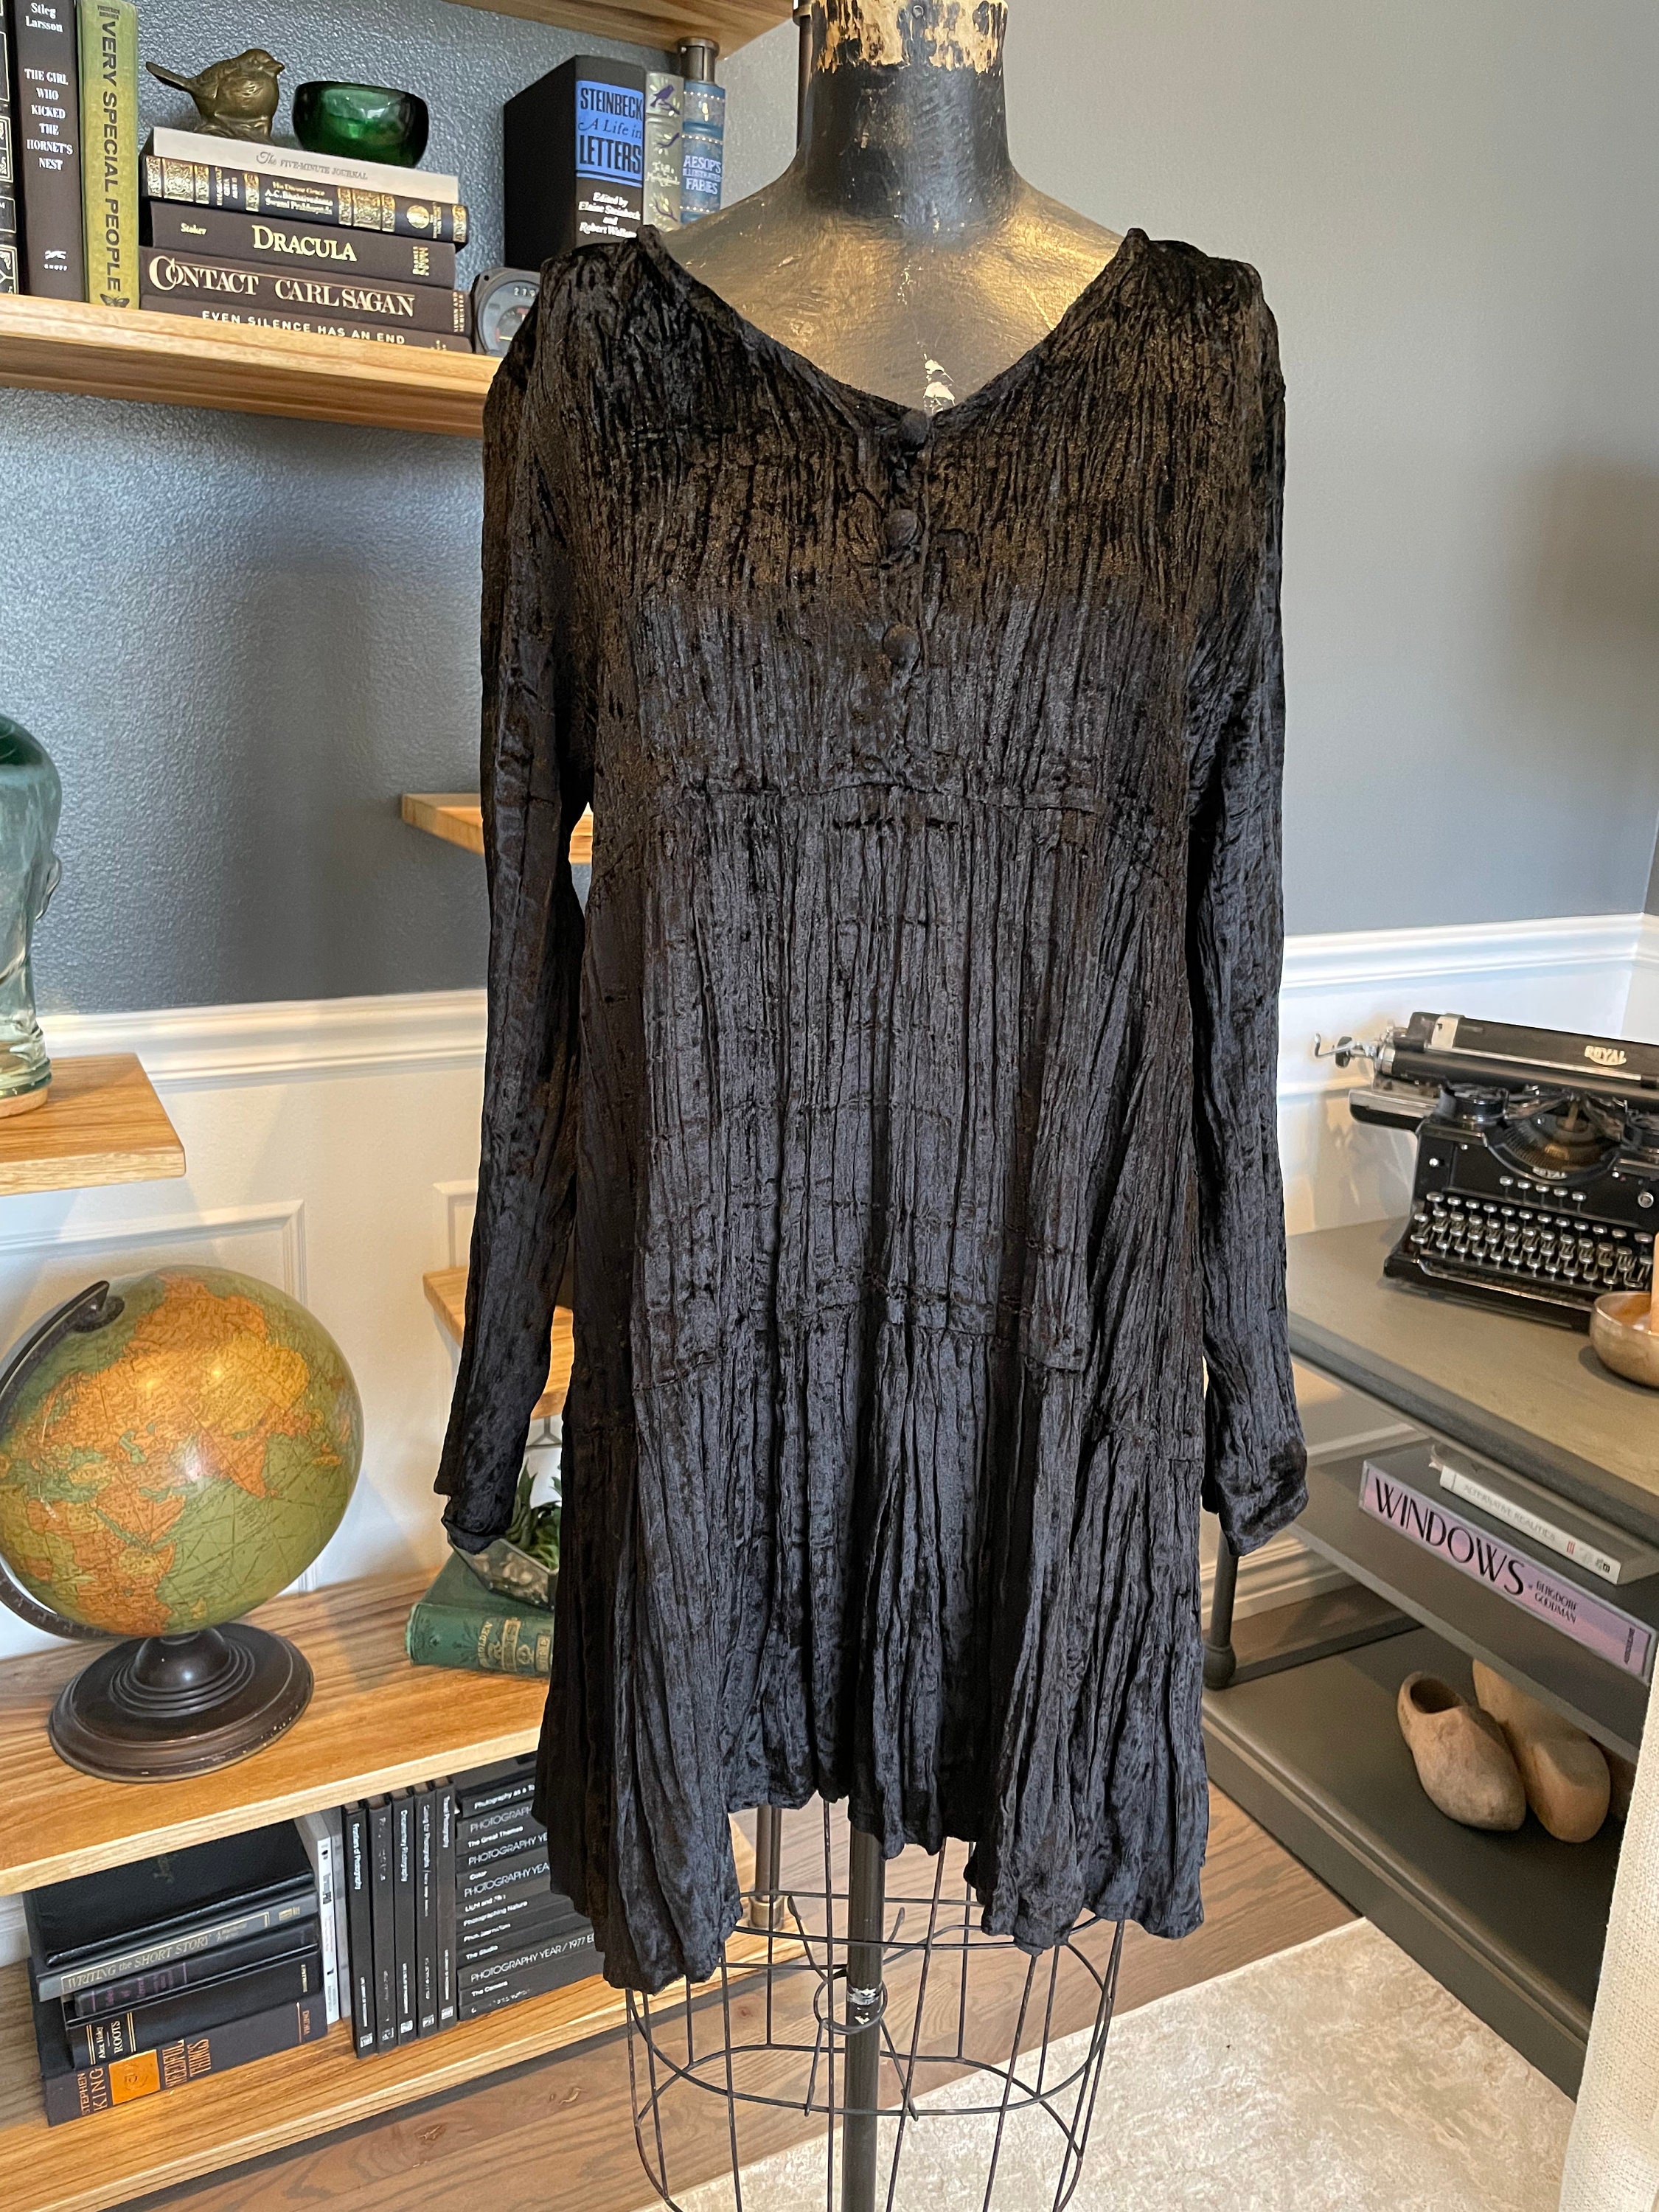 90s Crushed Velevet Contempo Casuals Black Dress Tunic -